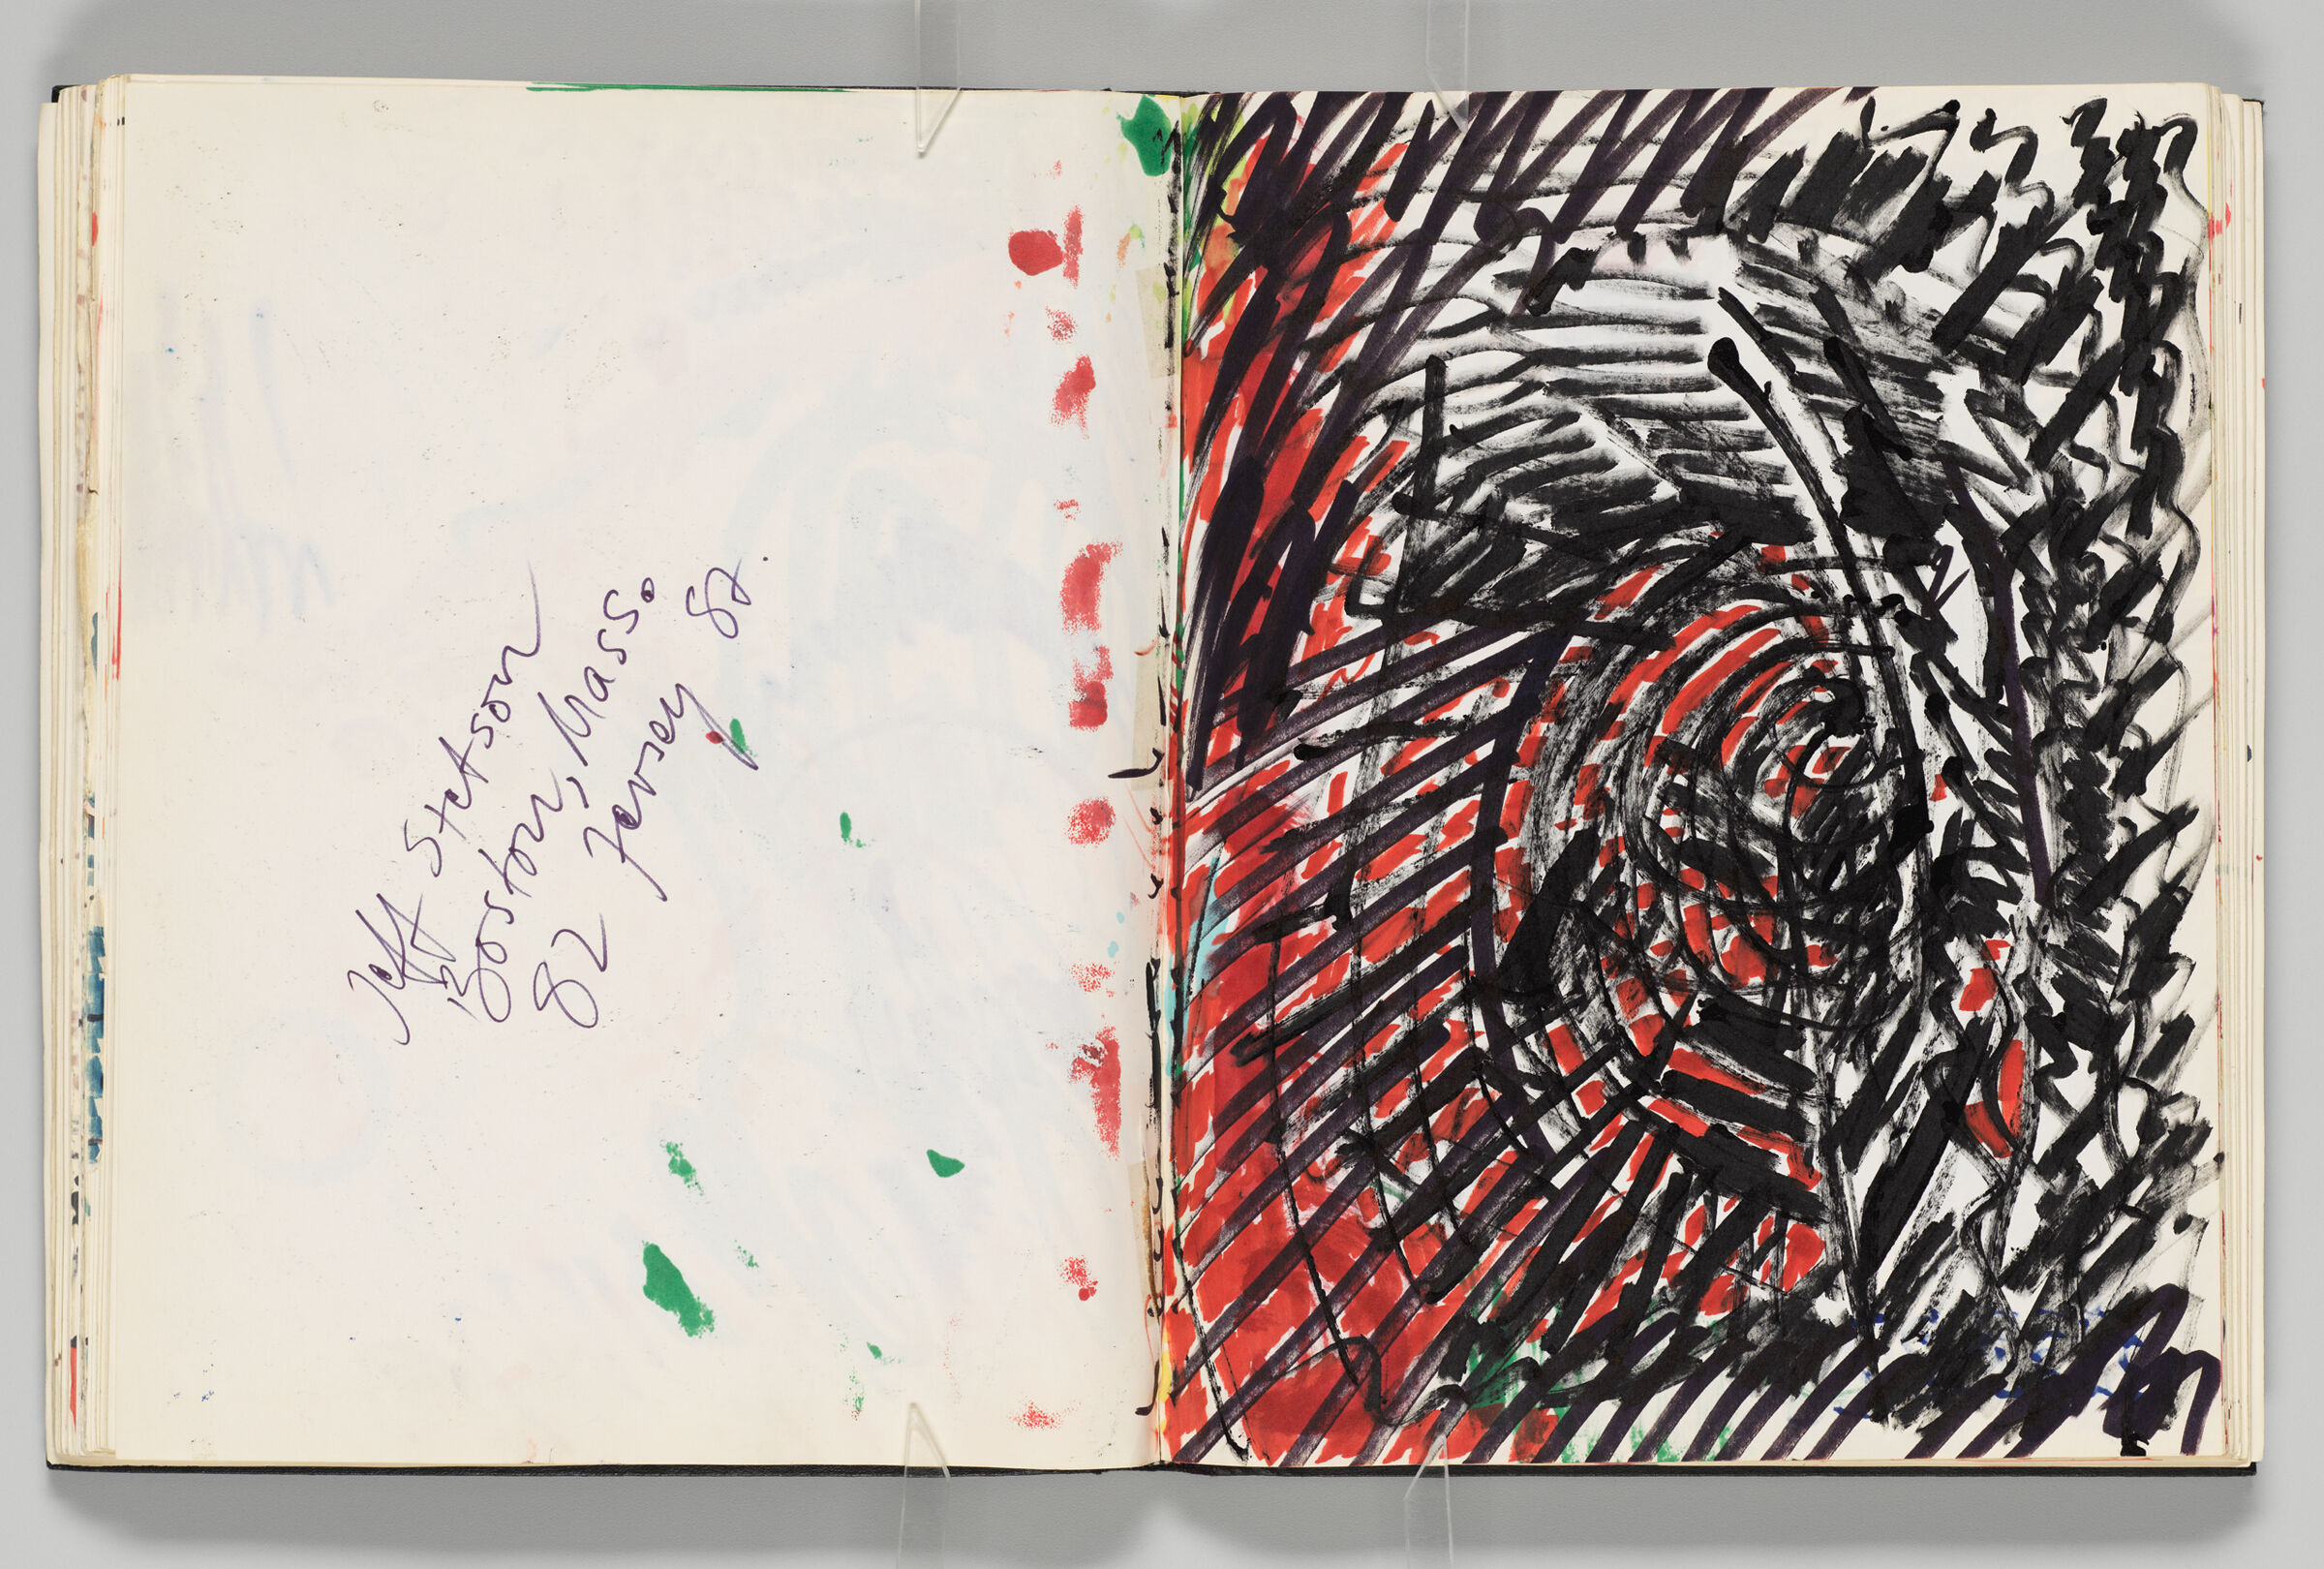 Untitled (Address With Bleed-Through Of Previous Page And Color Transfer, Left Page); Untitled (Sun/Eye Sketch, Right Page)